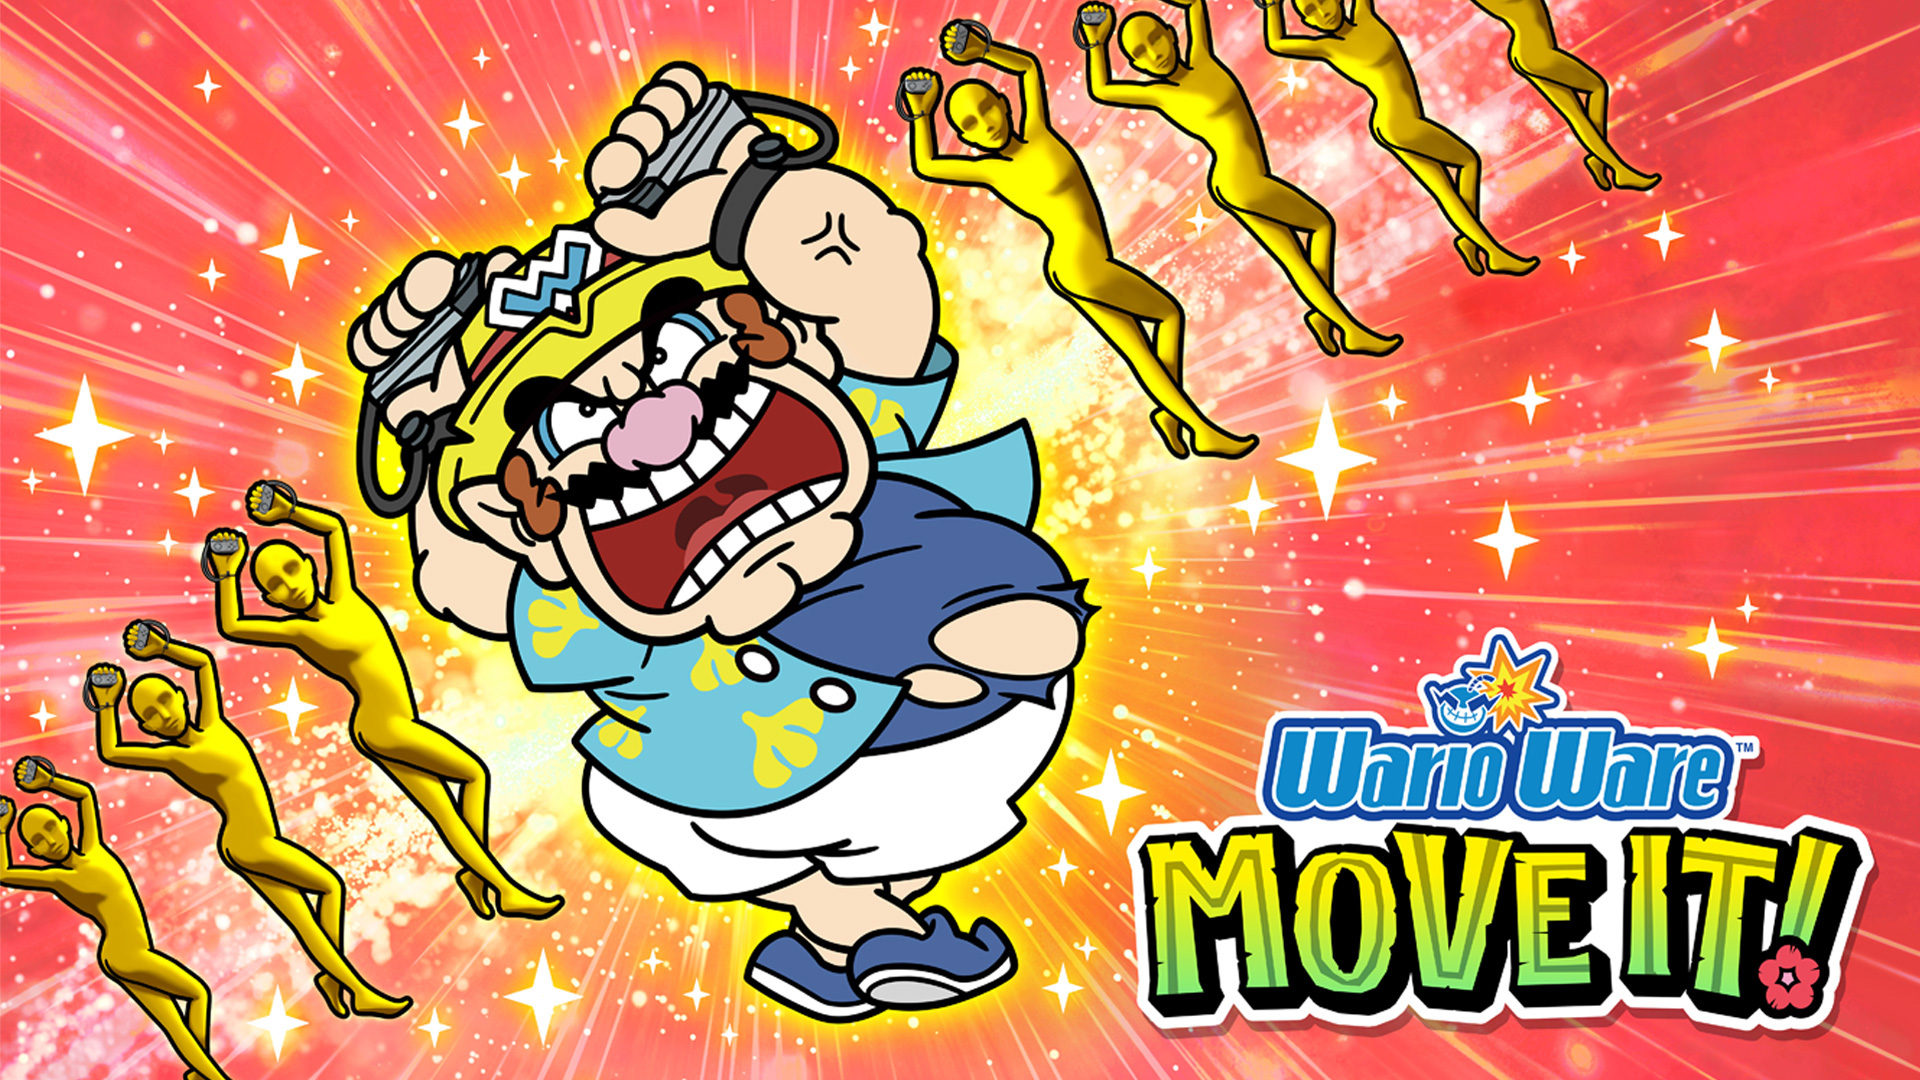 WarioWare Movie It! releases on November 3 with over 200 microgames